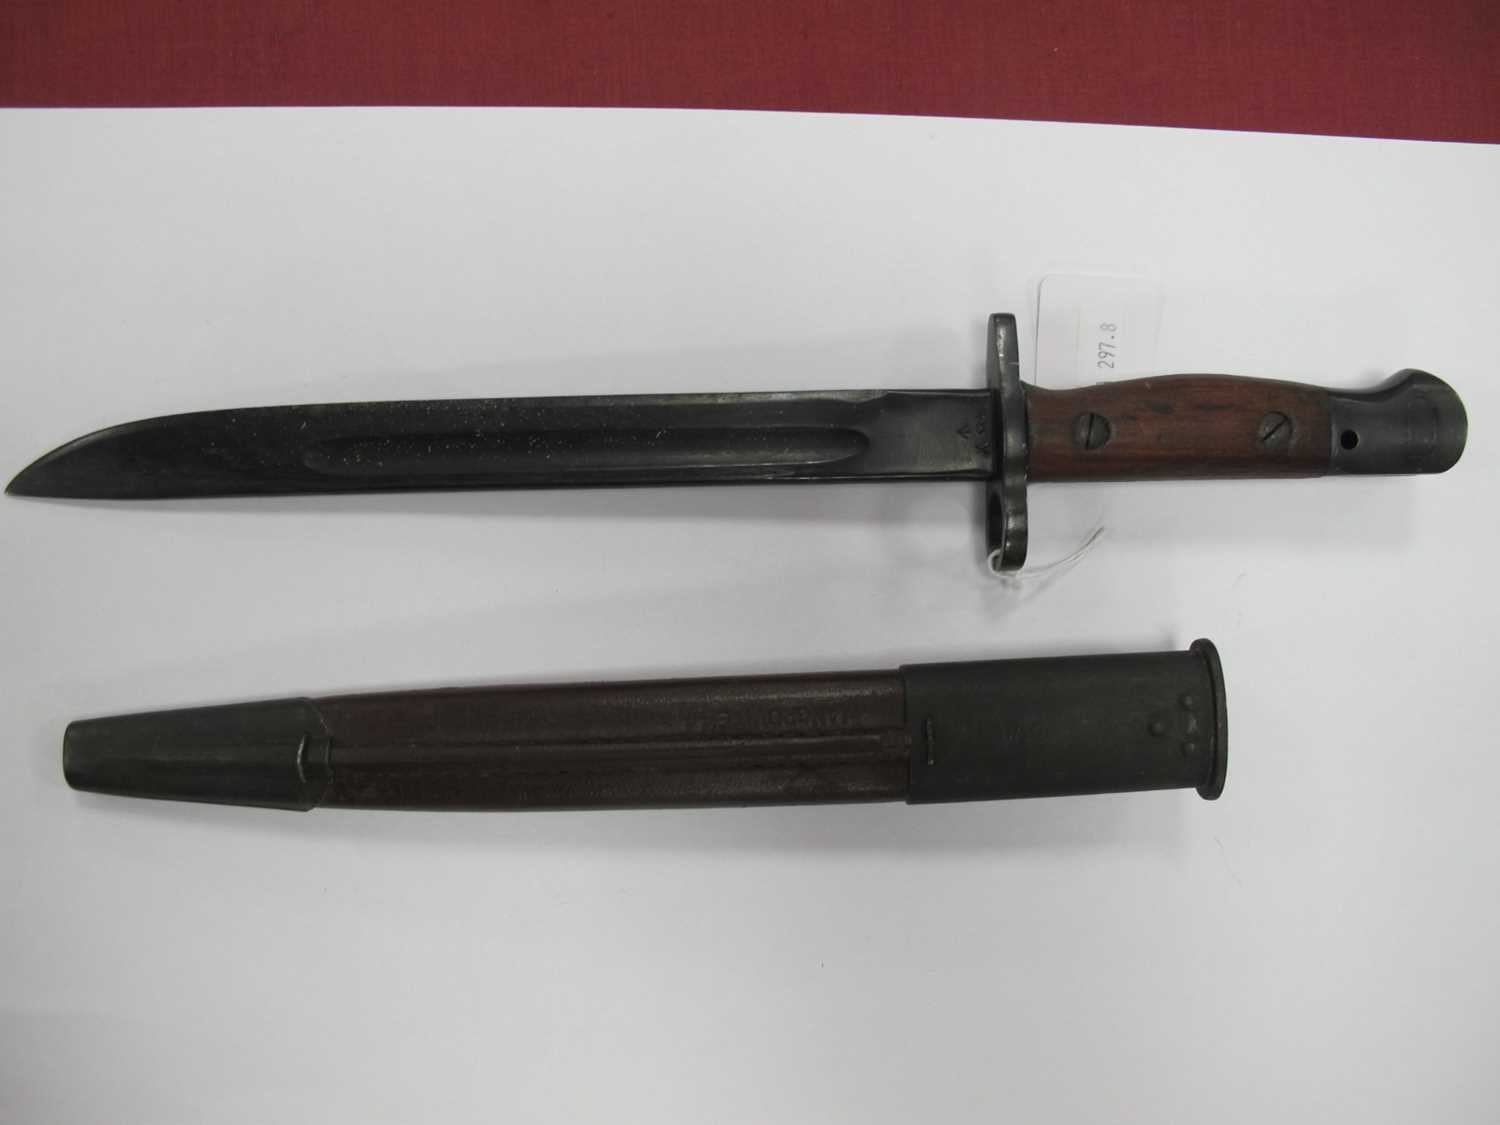 WWII Australian 1907 Pattern Short Bayonet, with various marks on blade including year '45', - Image 3 of 12